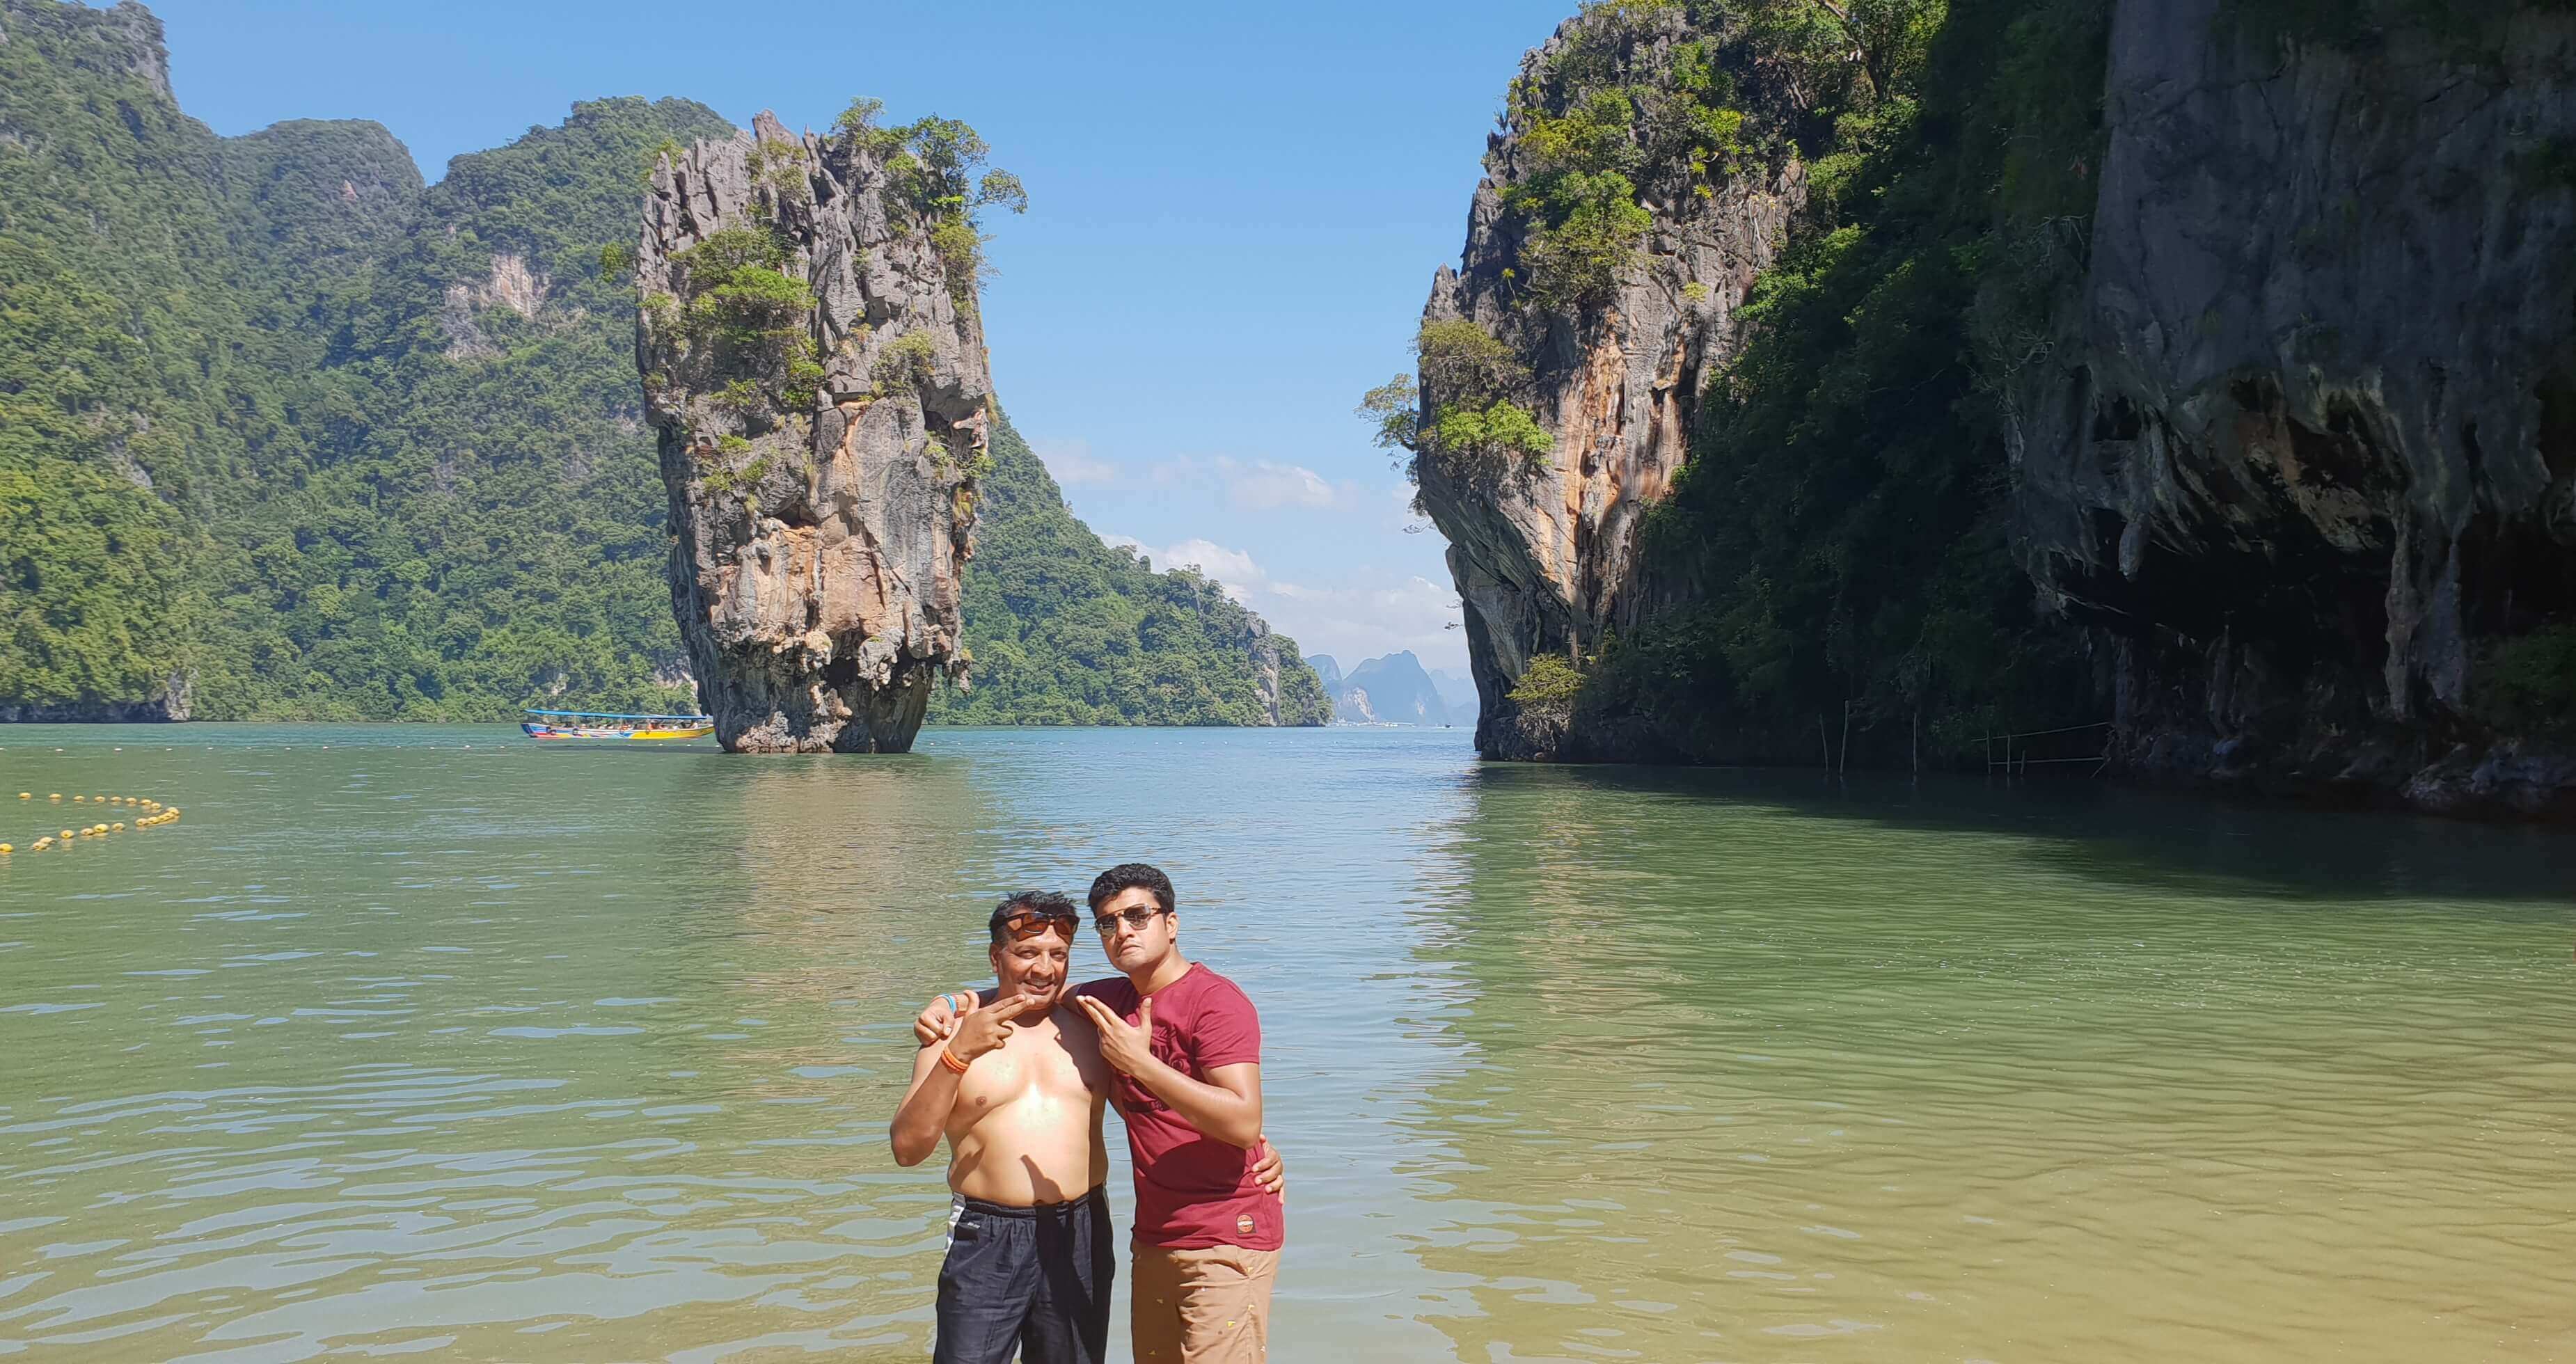 Dad and I giving the 007 pose because James Bond island